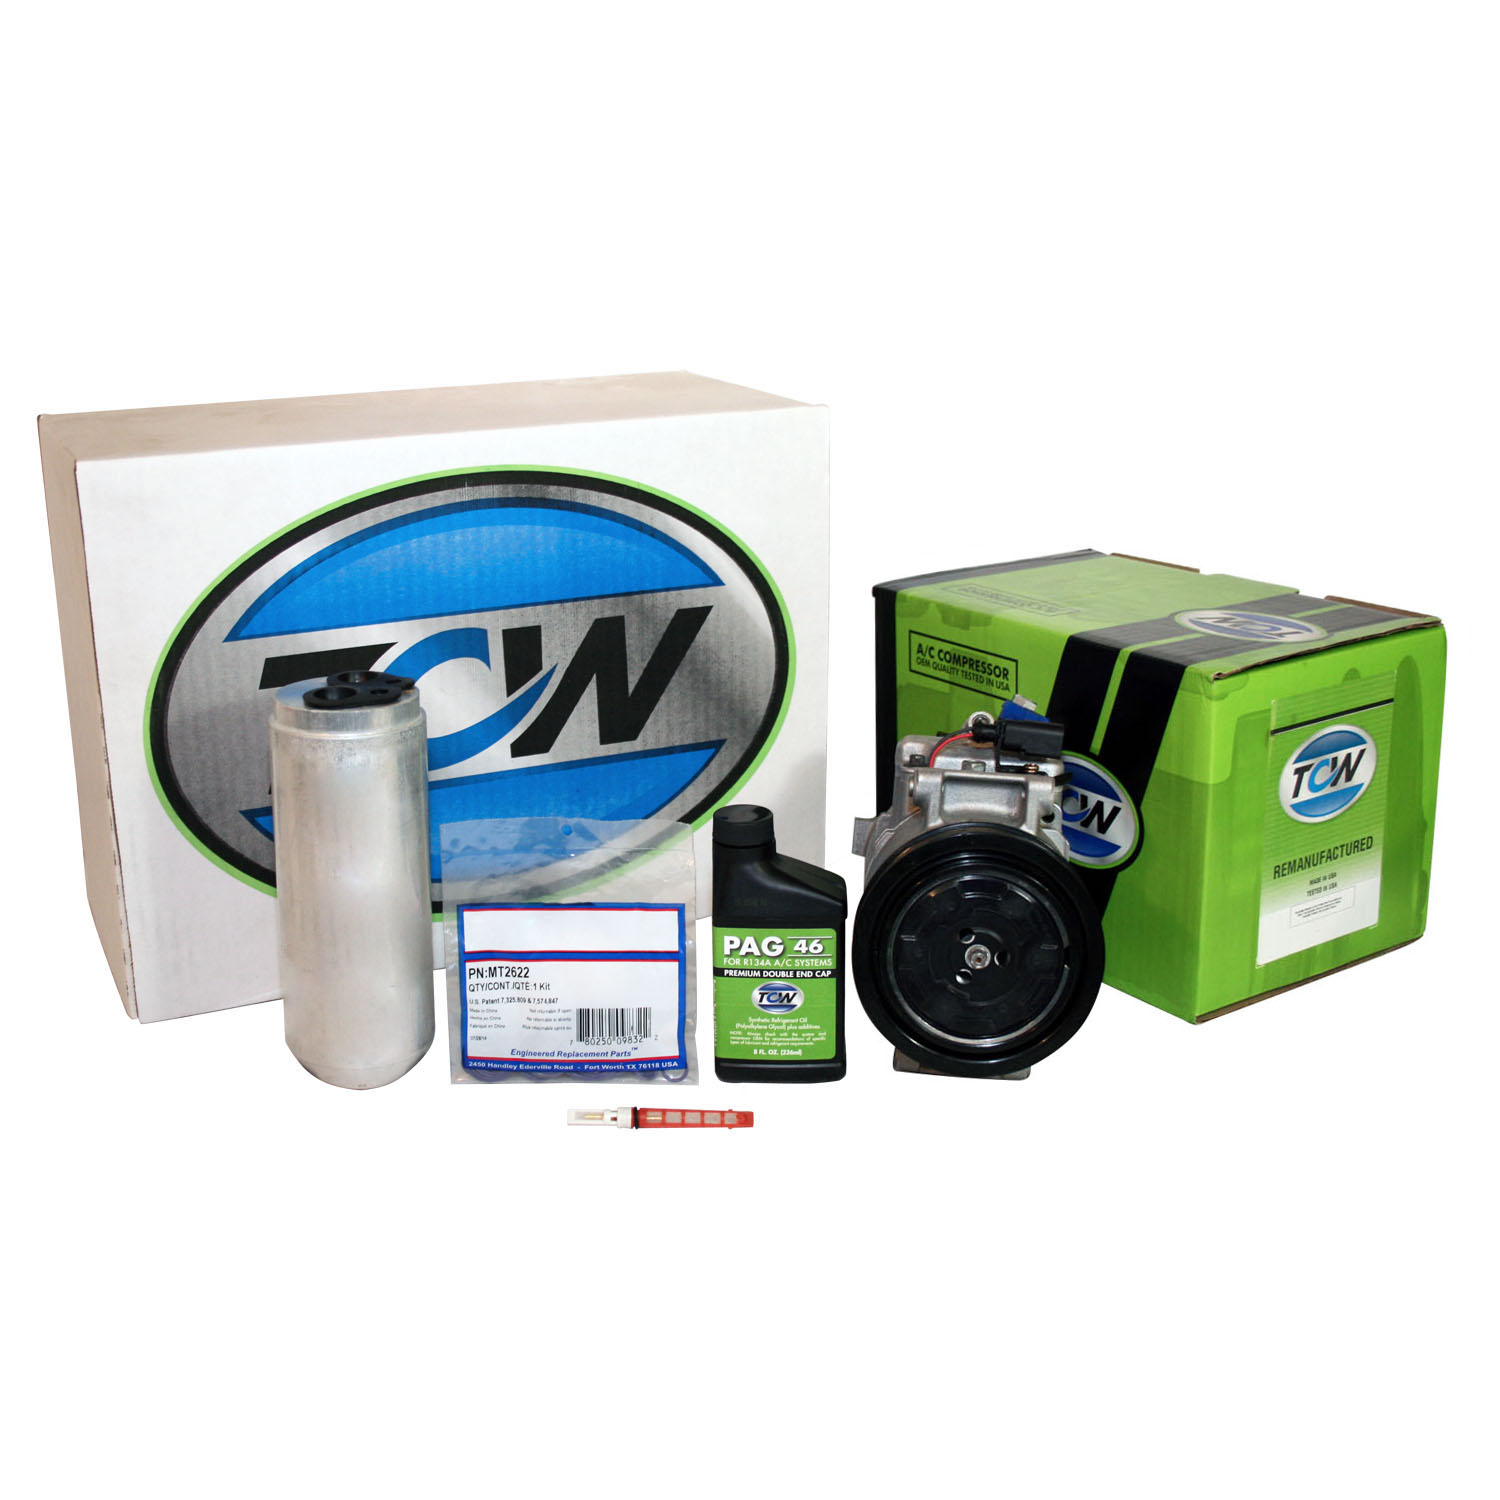 TCW Vehicle A/C Kit K1000394R Remanufactured Product Image field_60b6a13a6e67c